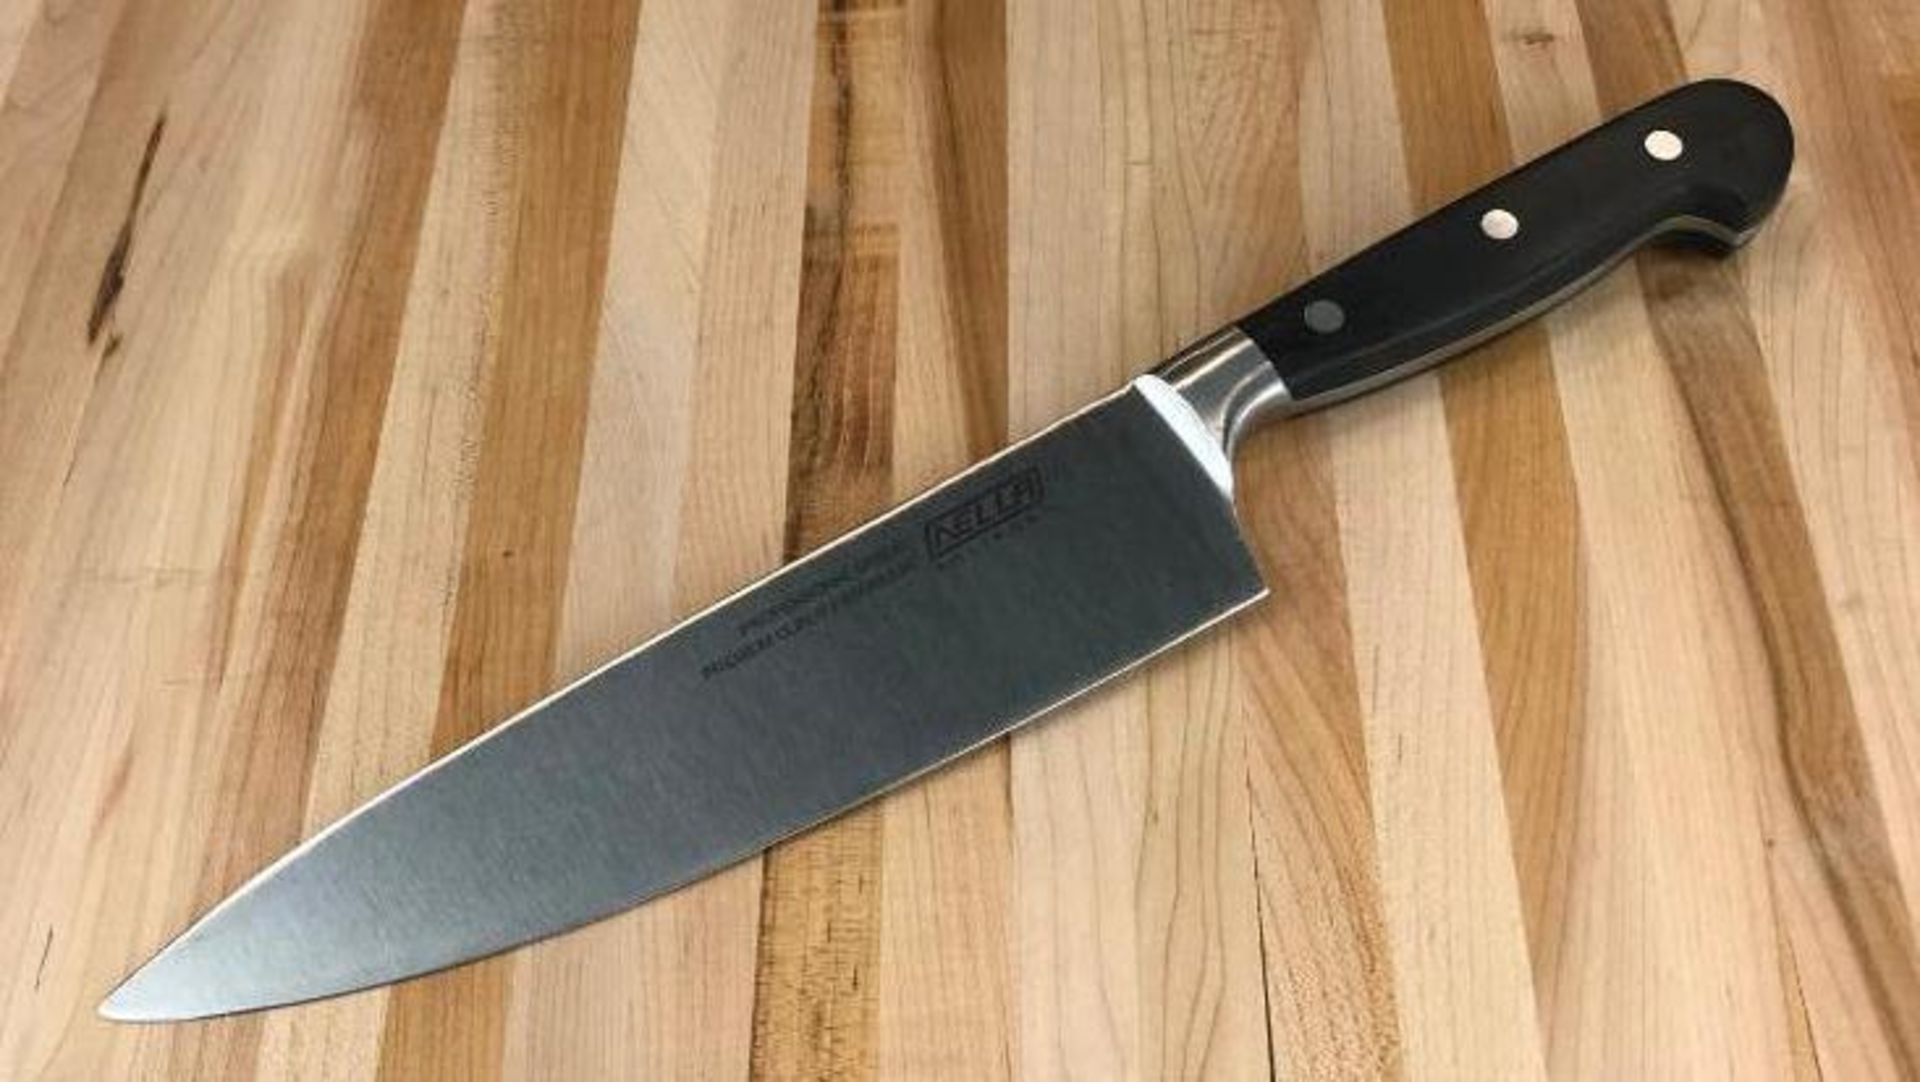 8" NELLA FORGED CHEF'S KNIFE & 13.5" STAINLESS STEEL COOK'S FORK - Image 2 of 3